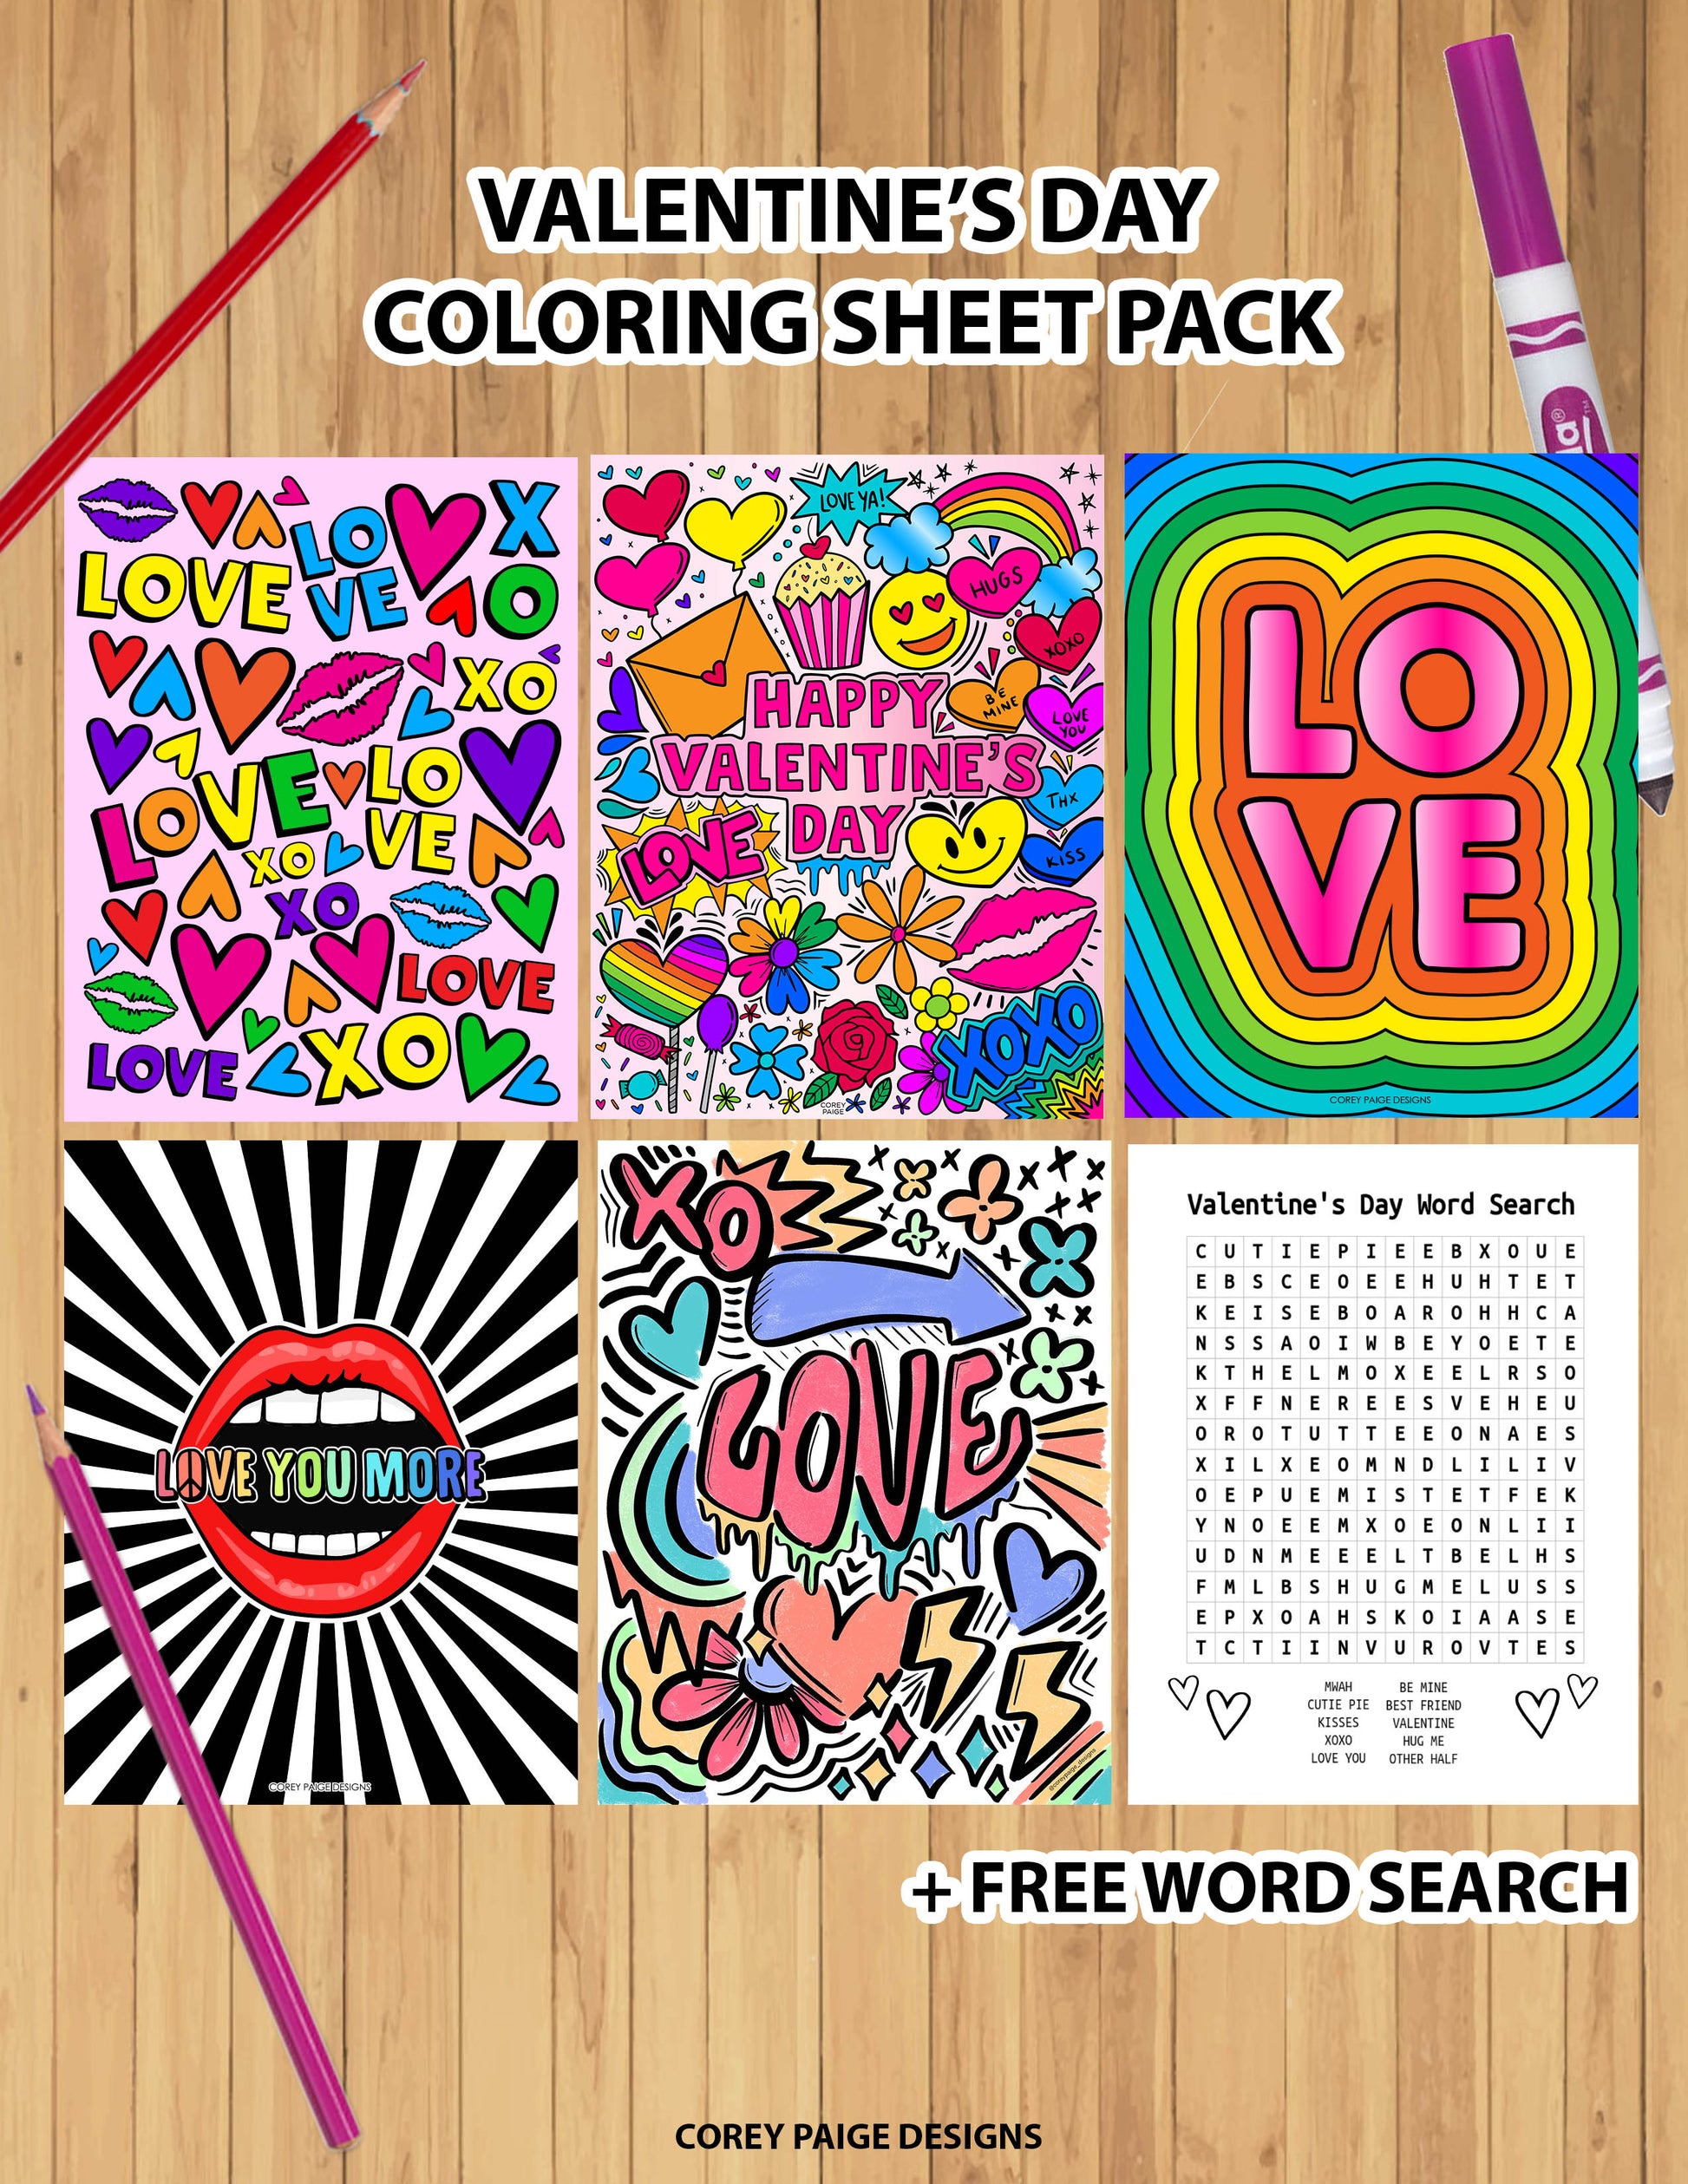 Doodle Along with Kasey: Heart  Doodle Along with Kasey from P'zazz Art  Studio today as she draws a colorful heart! If you are coloring along today  you will need: Paper Pencil